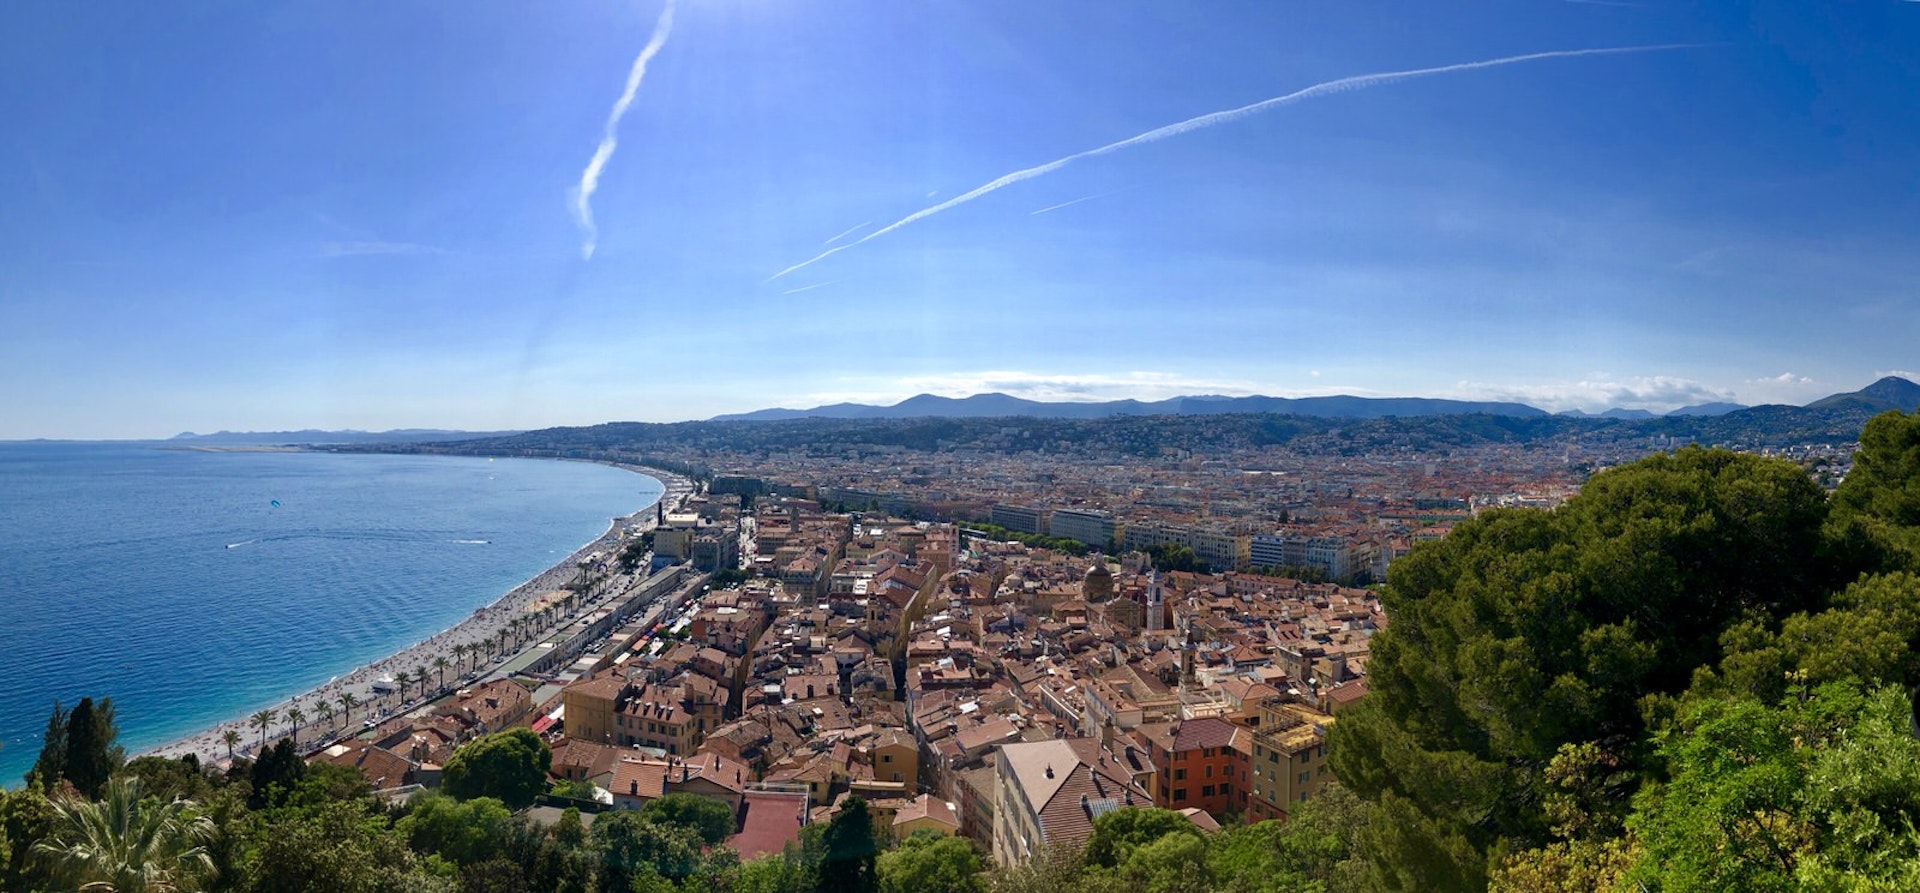 Spending diary Nice - A panorama shot of Nice on a sunny day from up high. On the right, there are red rooftops, on the left the promenada, beach and sea.